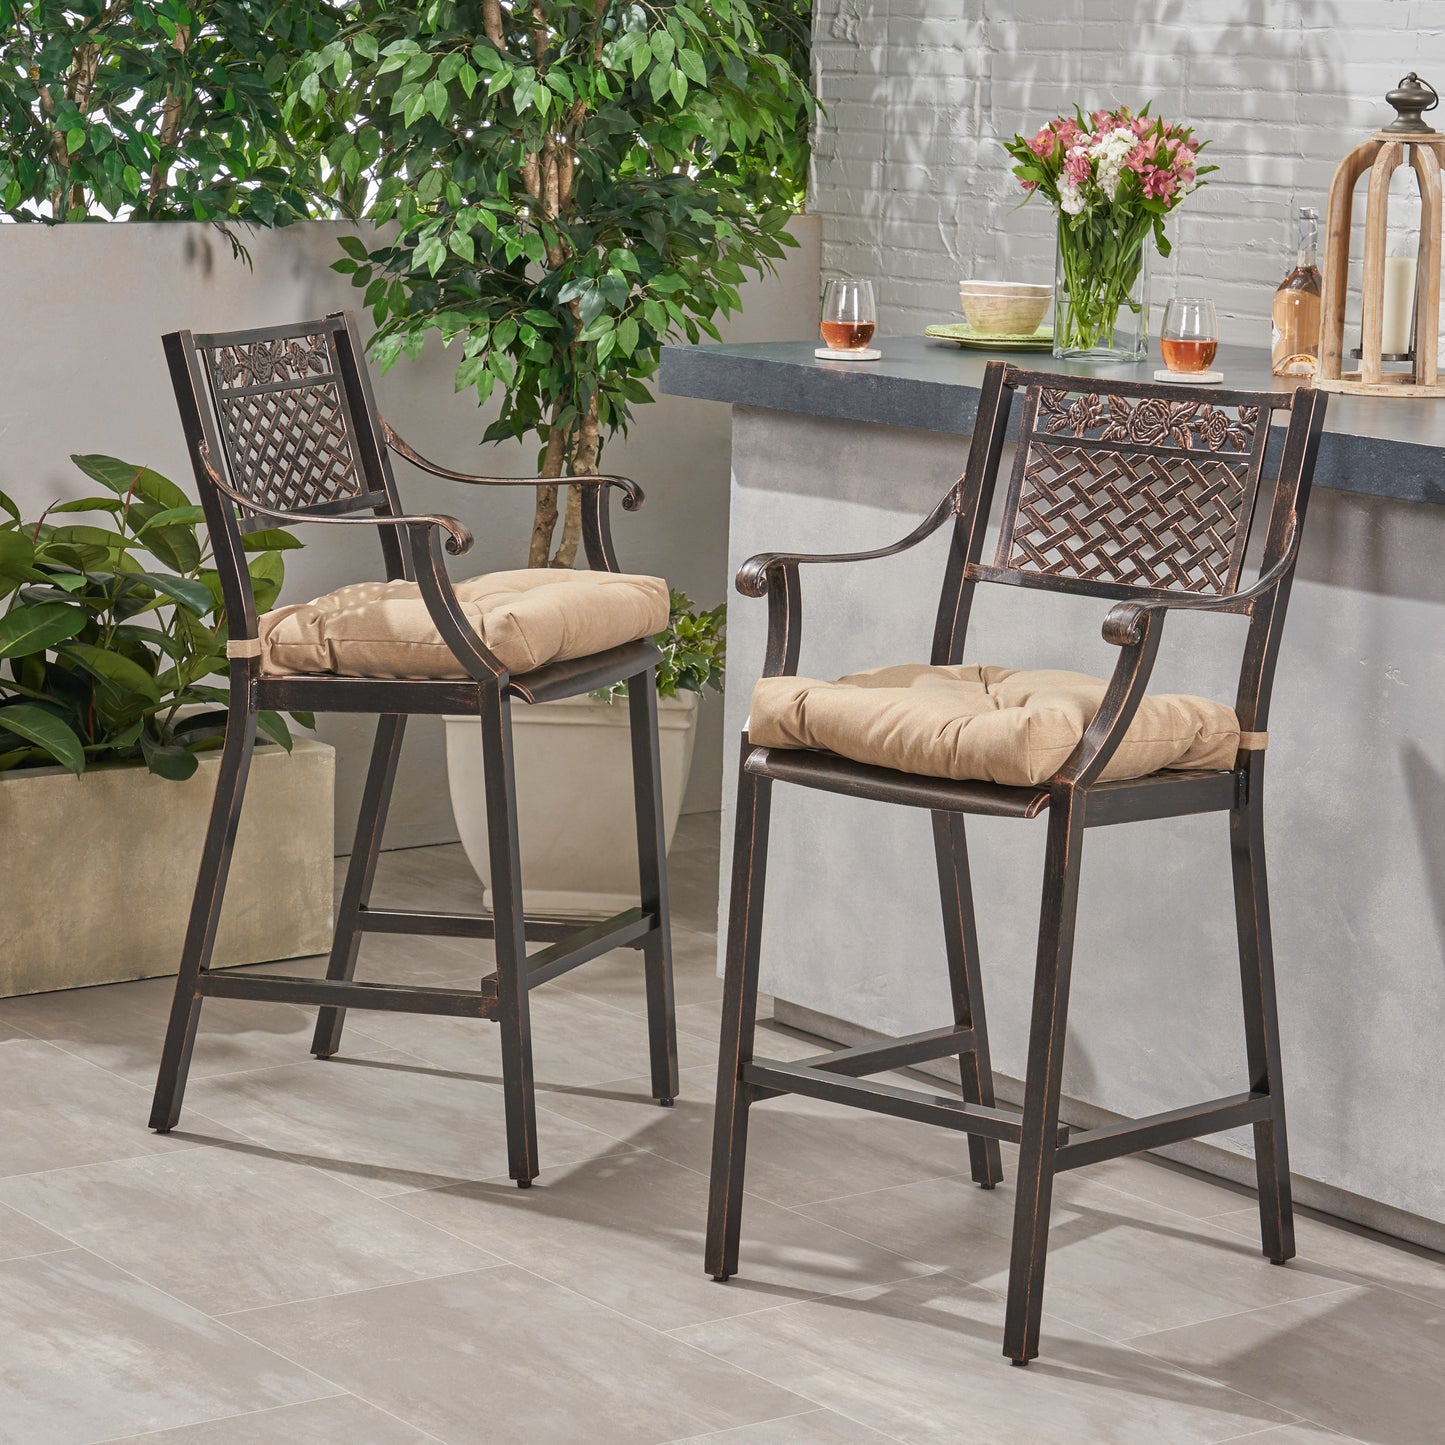 Vista Outdoor Barstool with Cushion (Set of 2)